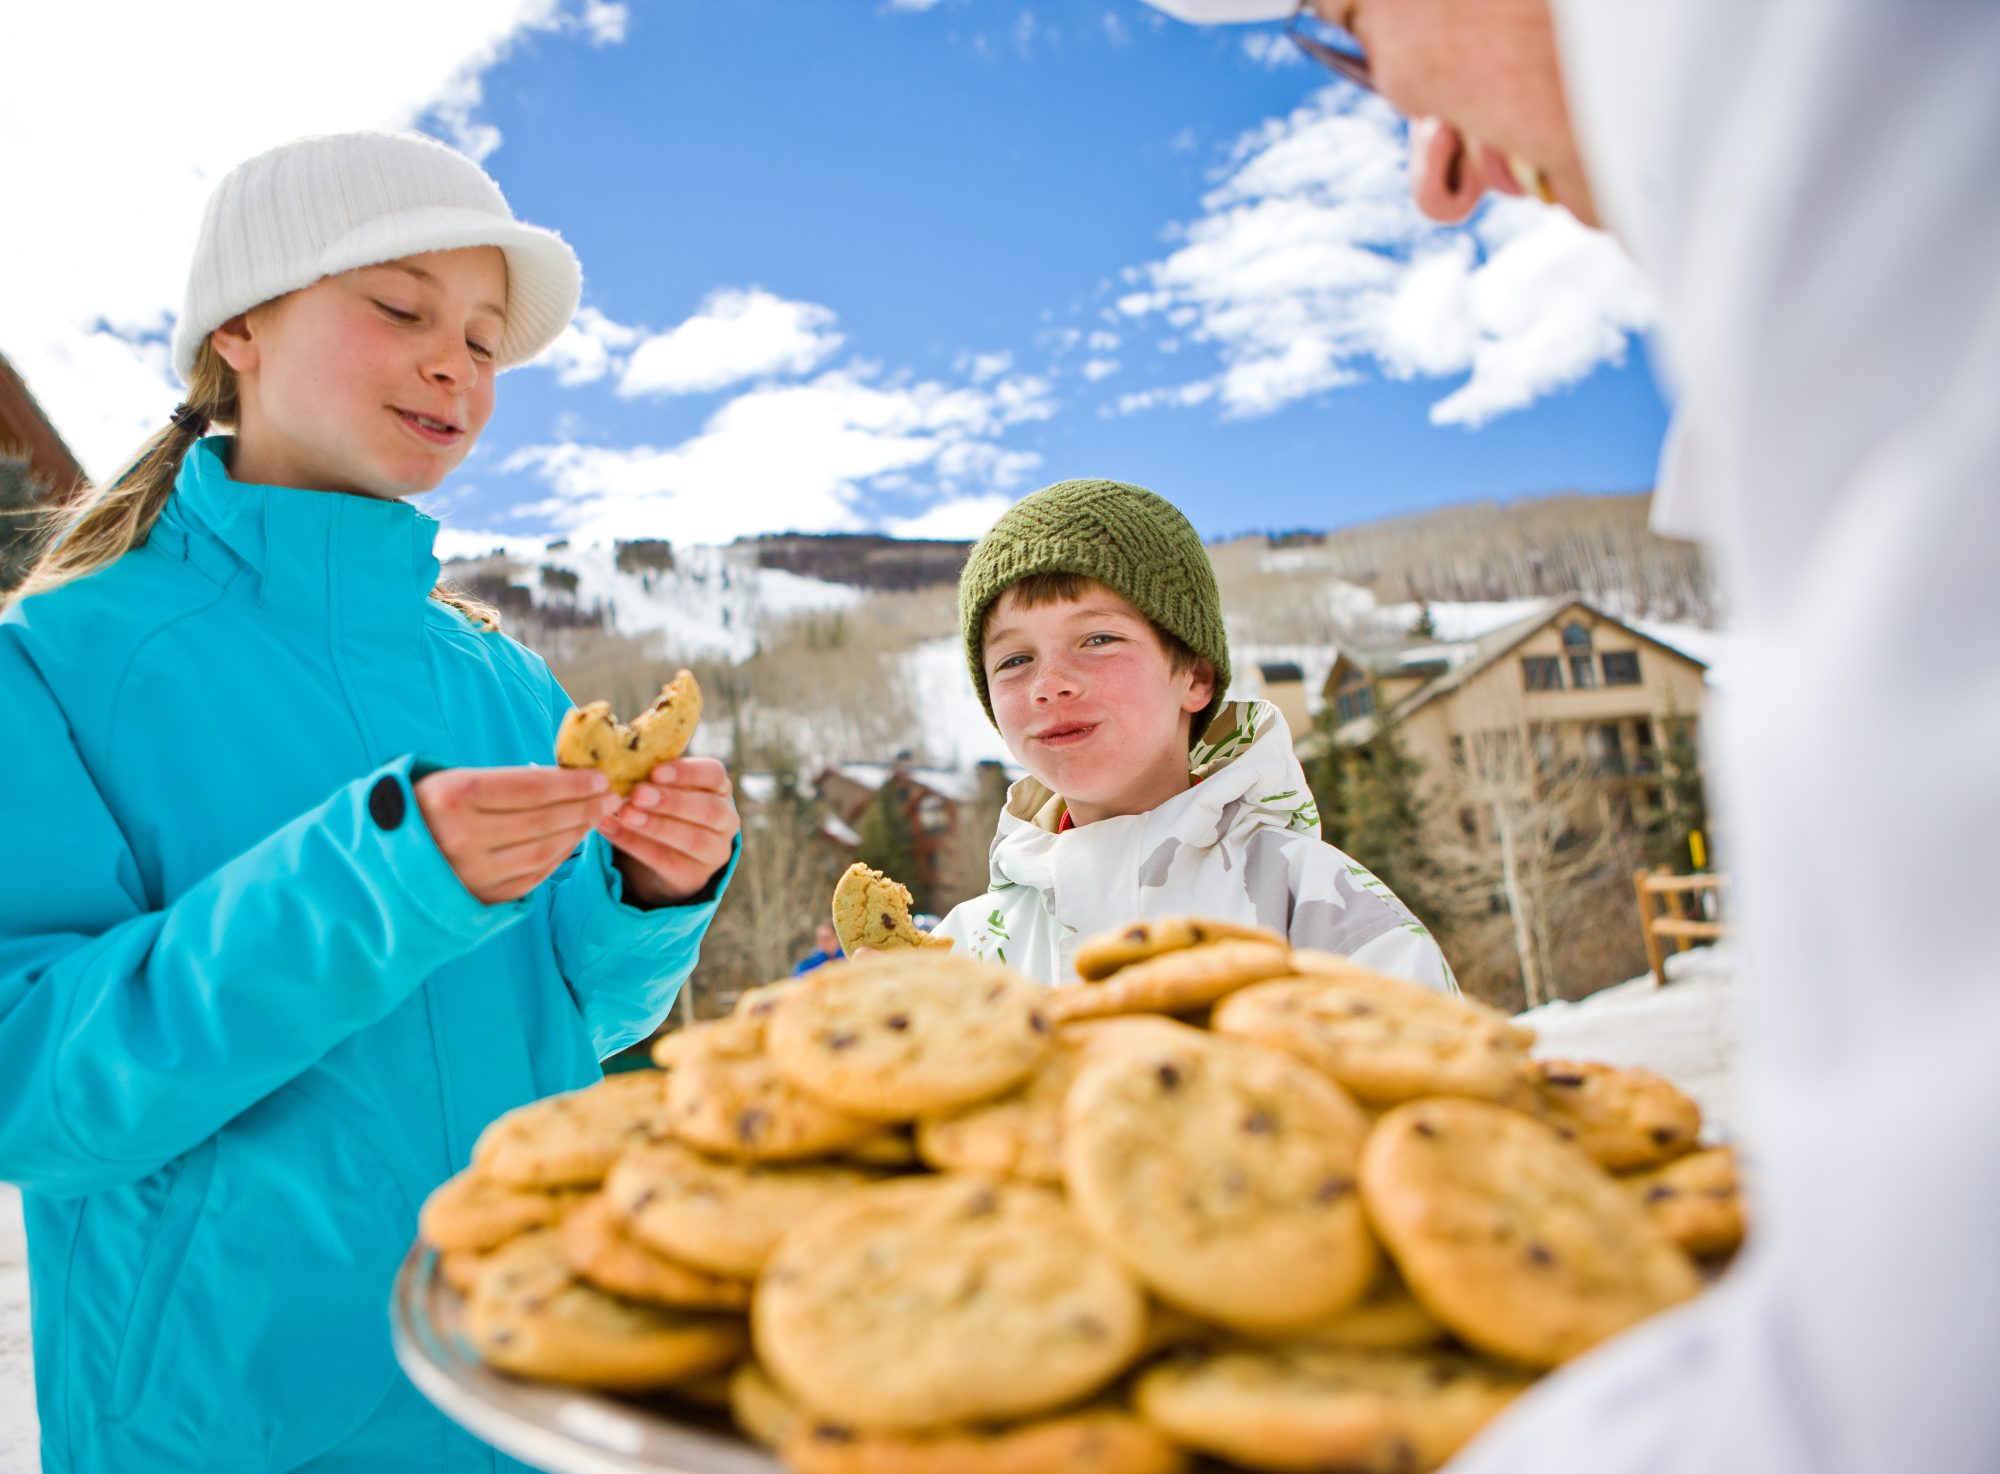 In Beaver Creek, CO, you can get some complimentary cookies. Kids and adults alike, love them! Vail Resorts Reports Certain Ski Season Metrics for the Season-to-Date Period Ended April 21, 2019.